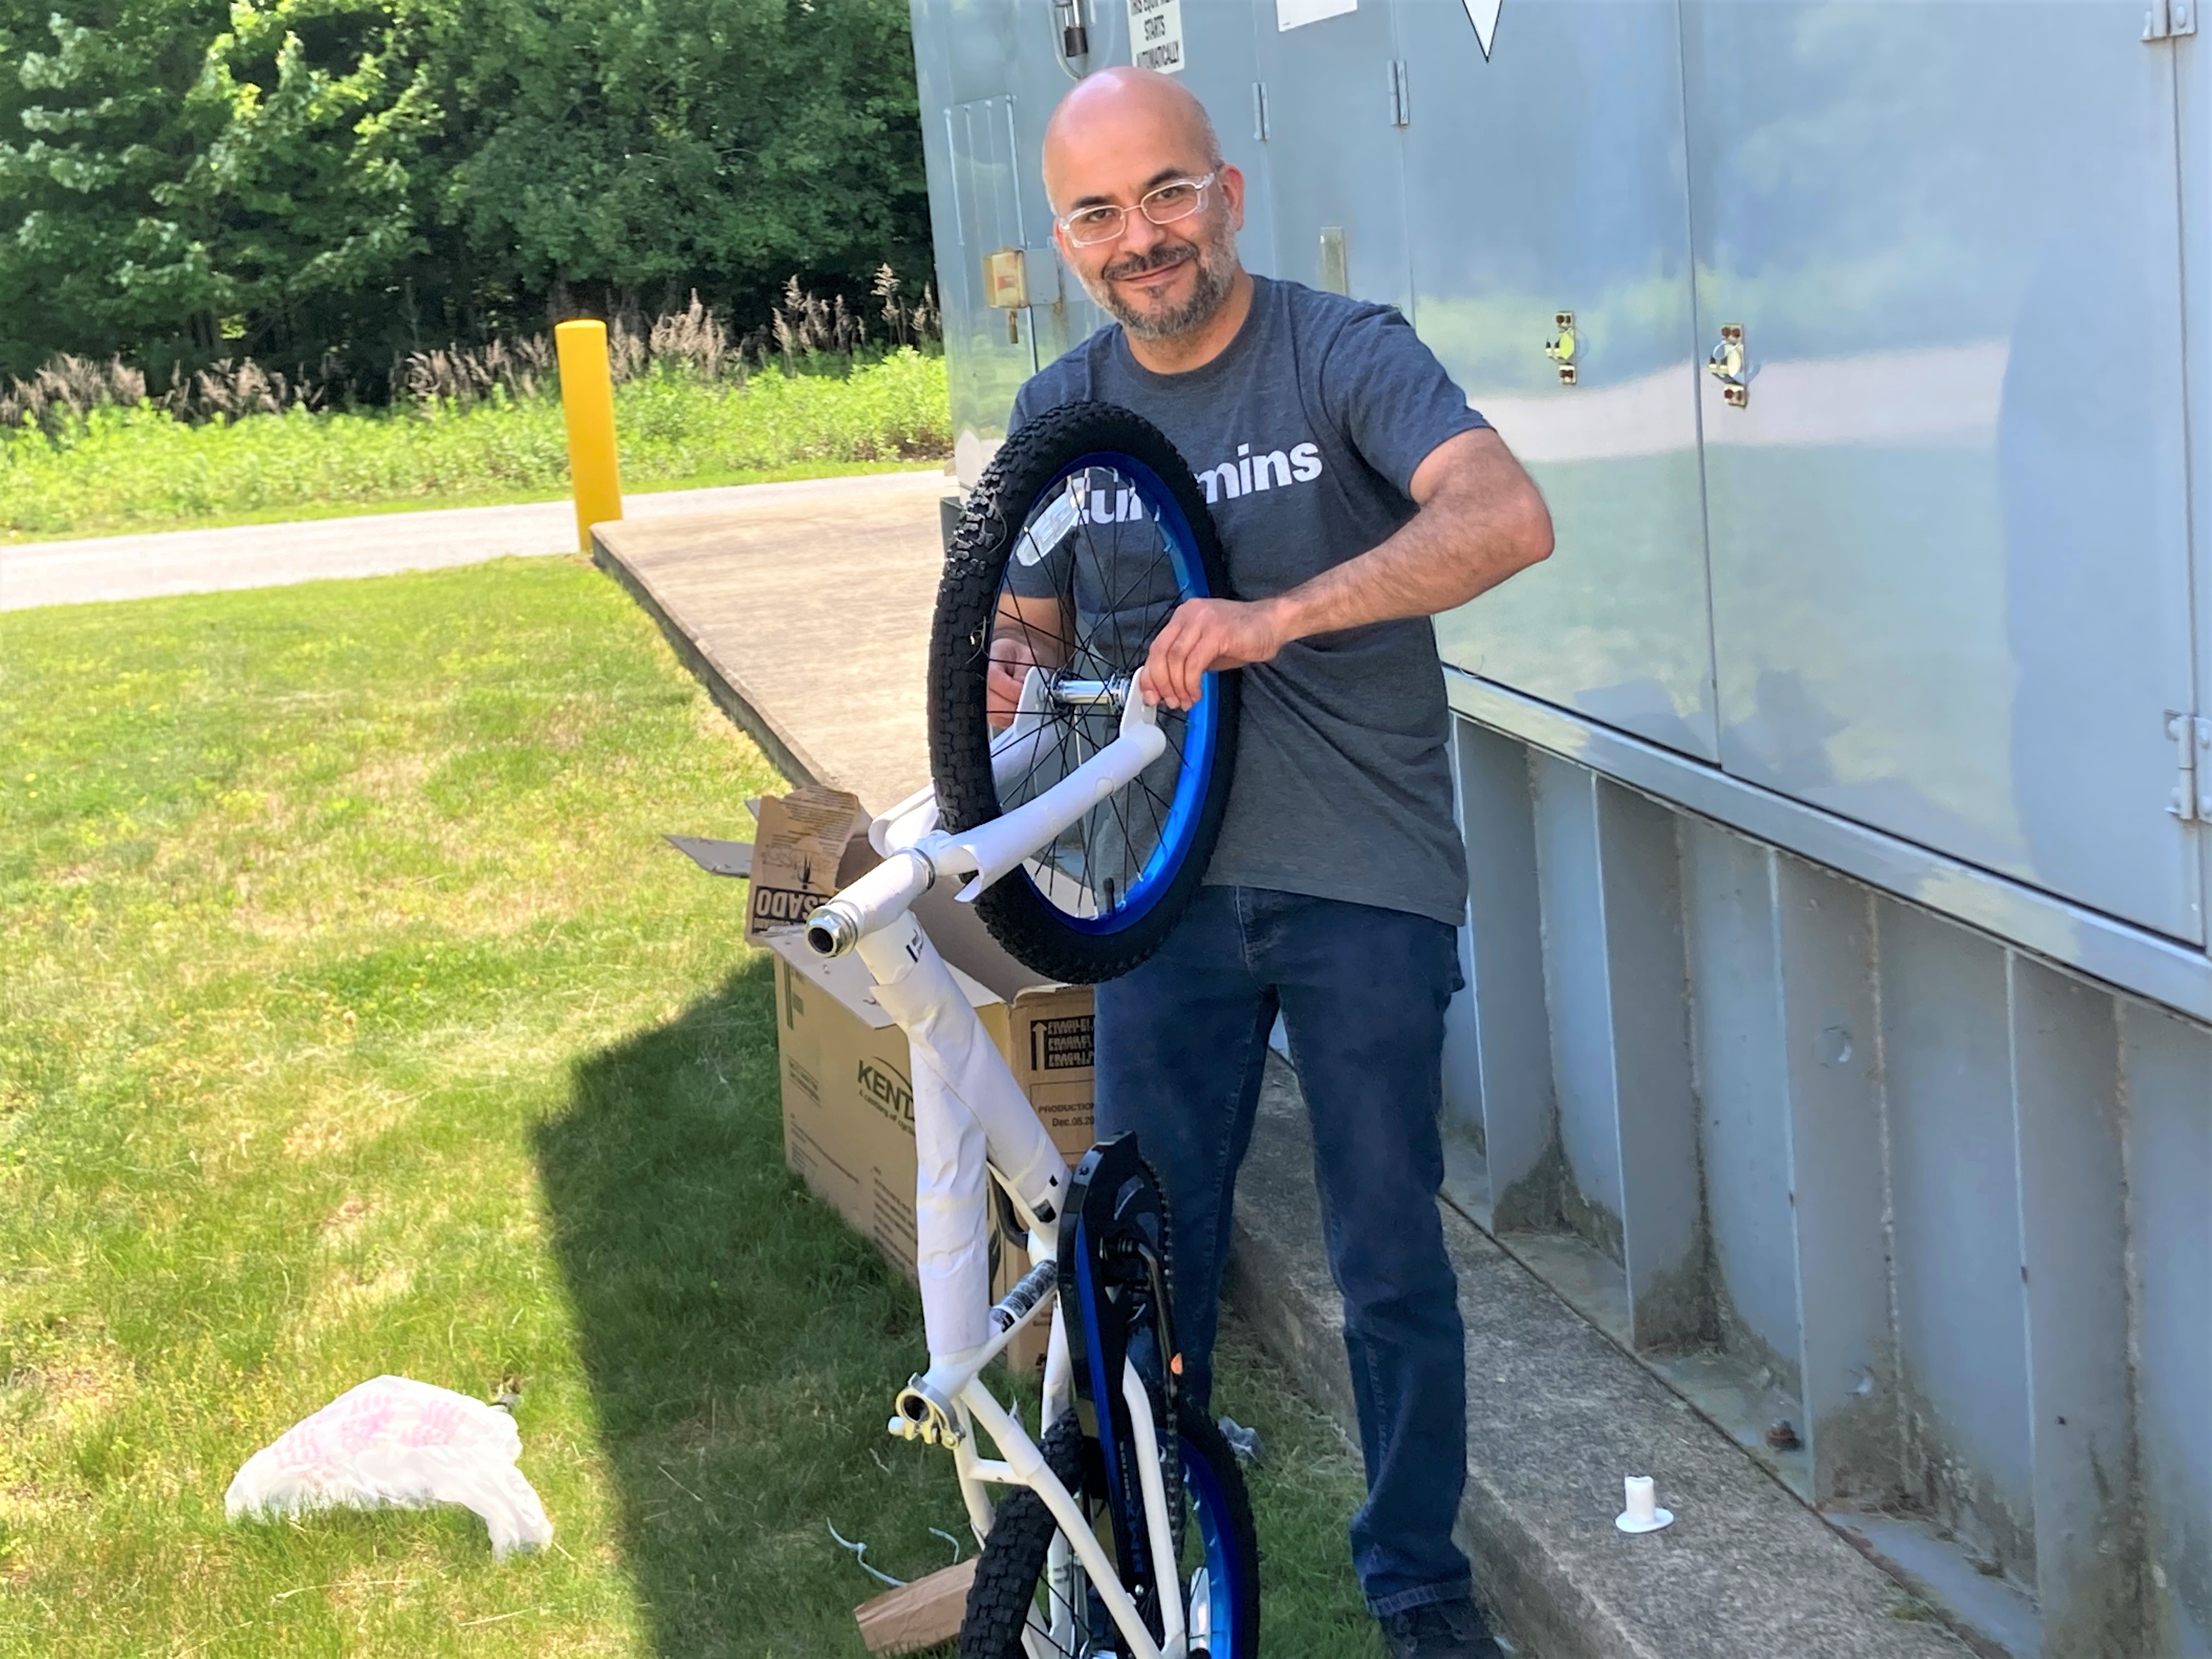 Malta employees kick off summer by building bikes